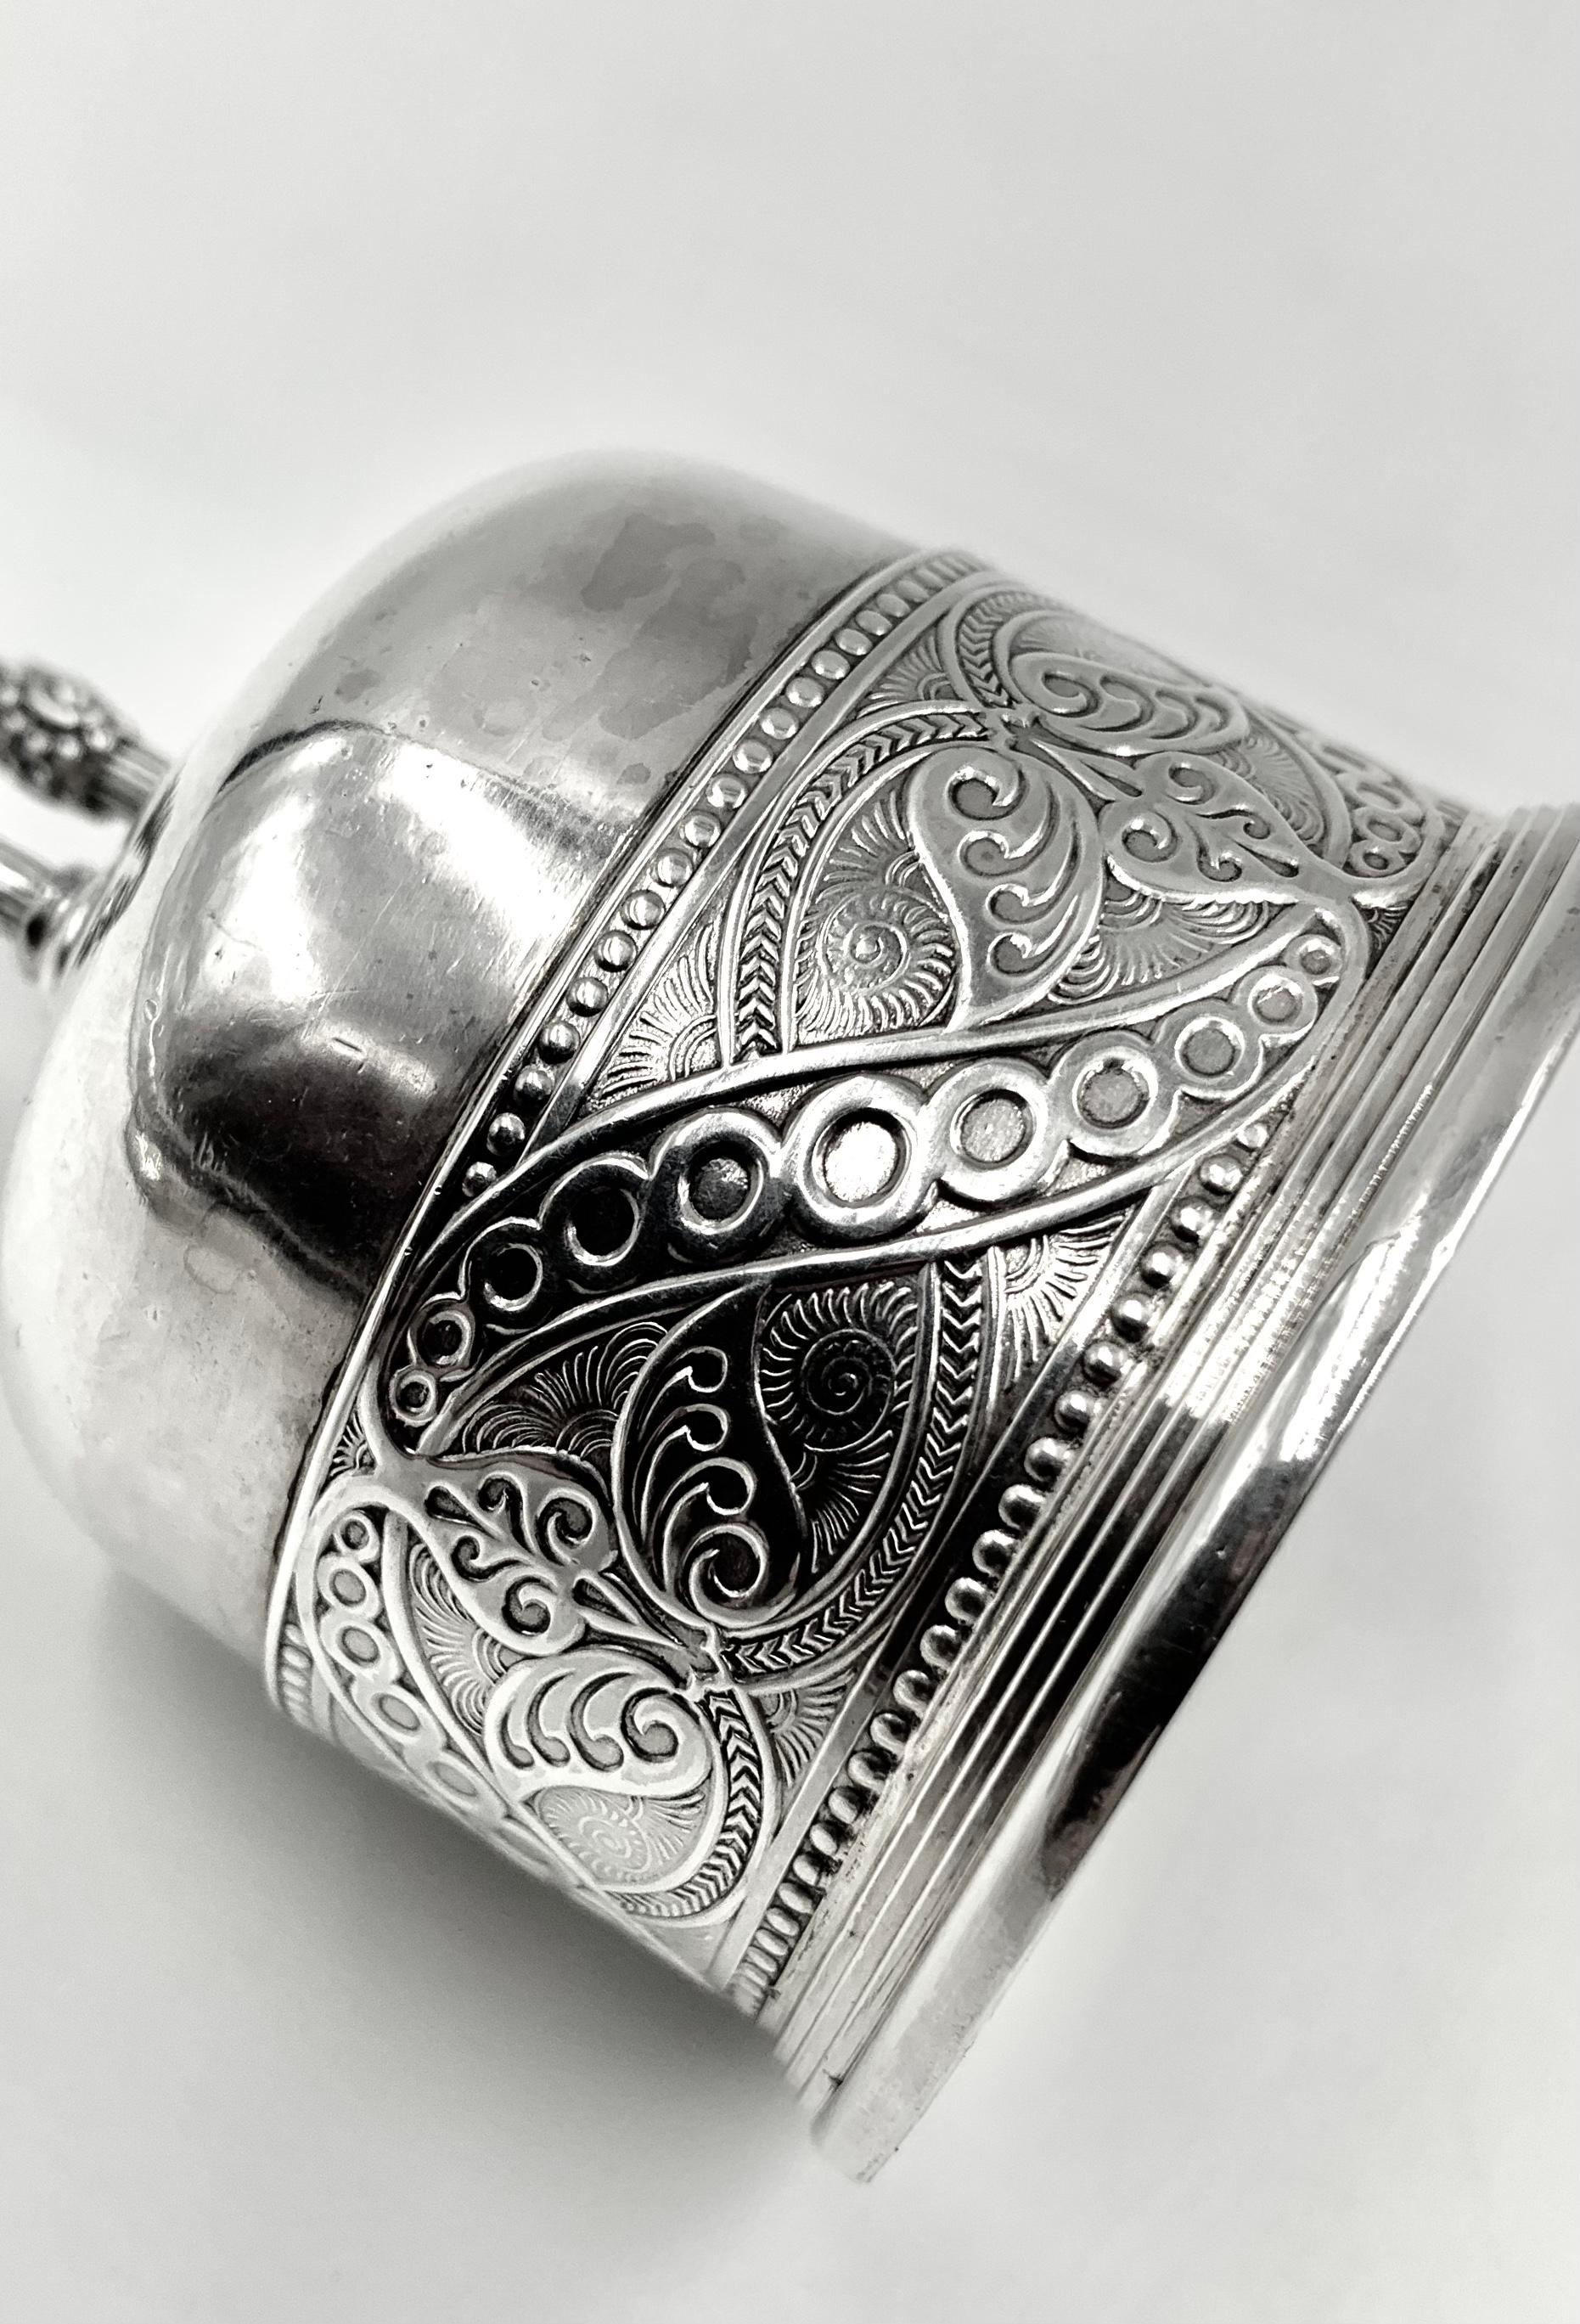 Rare antique Edward Moore period, 1873-1891, sterling silver Tiffany & Co. table bell on stand.
The bell with a tall inverse U-shaped handle of exceptional detail- reeded design interspersed with five double bands and twelve stylized sun designs,